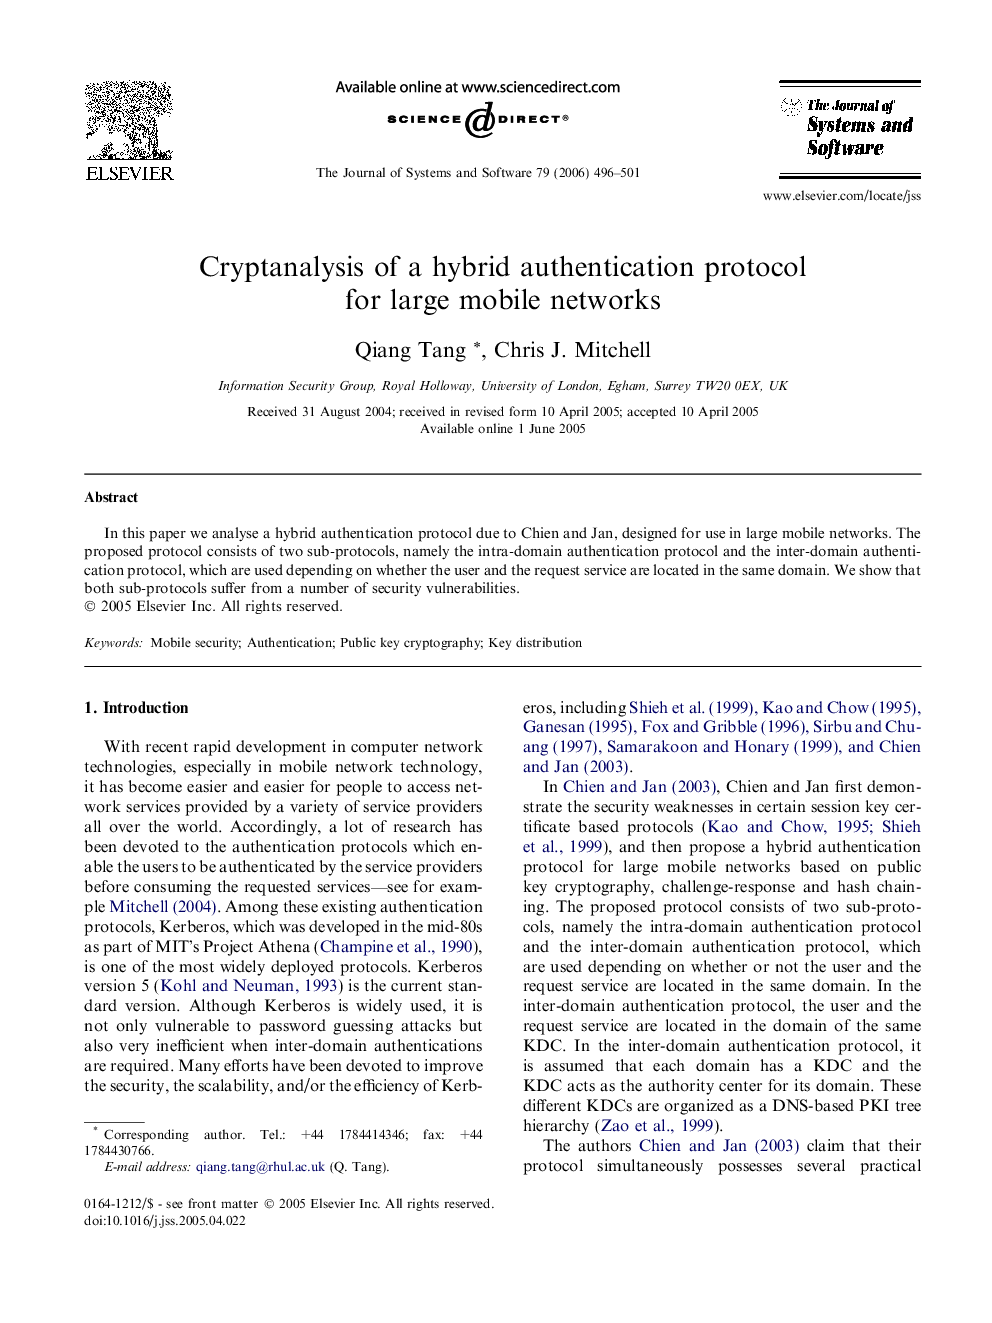 Cryptanalysis of a hybrid authentication protocol for large mobile networks